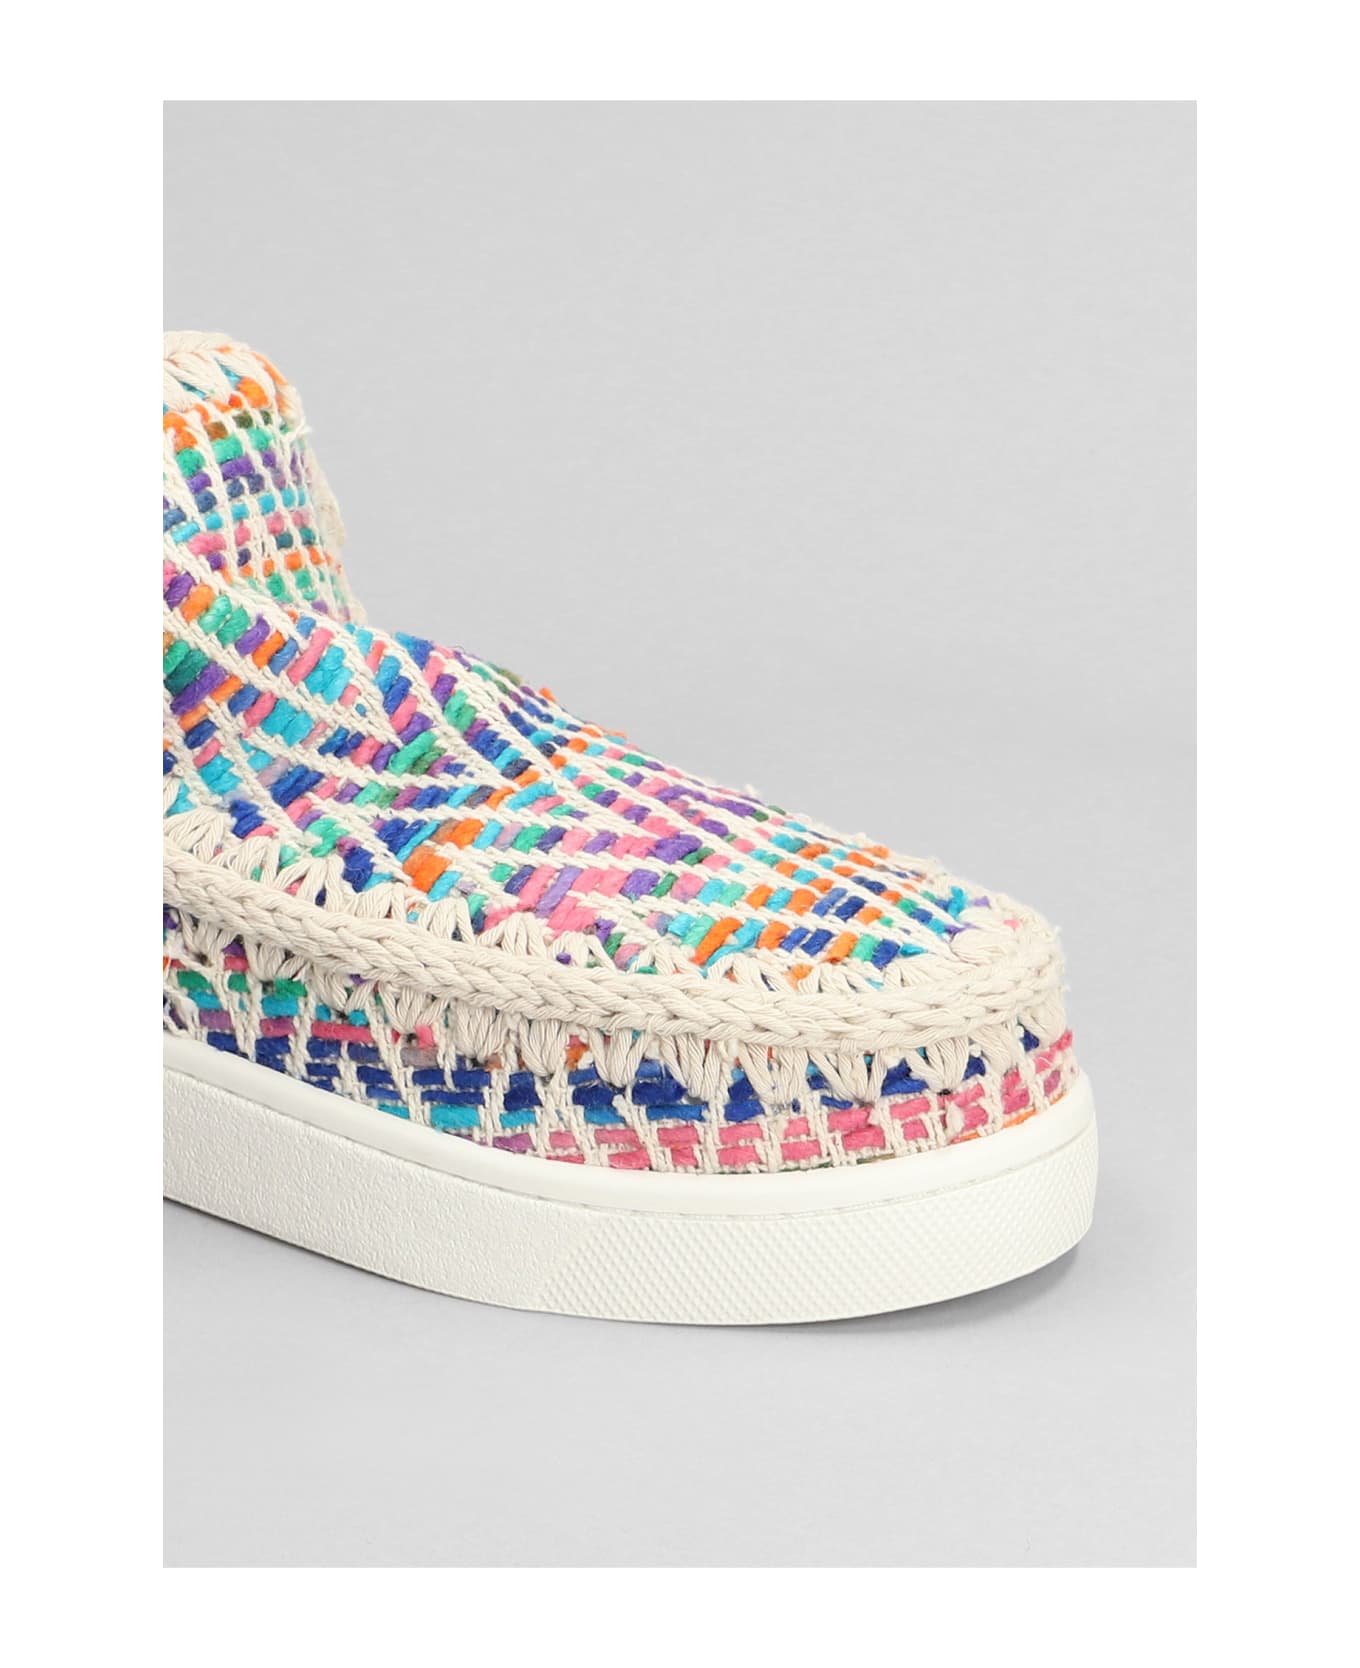 Mou Eskimo Sneaker Low Heels Ankle Boots In Multicolor Synthetic Fibers - multicolor スニーカー